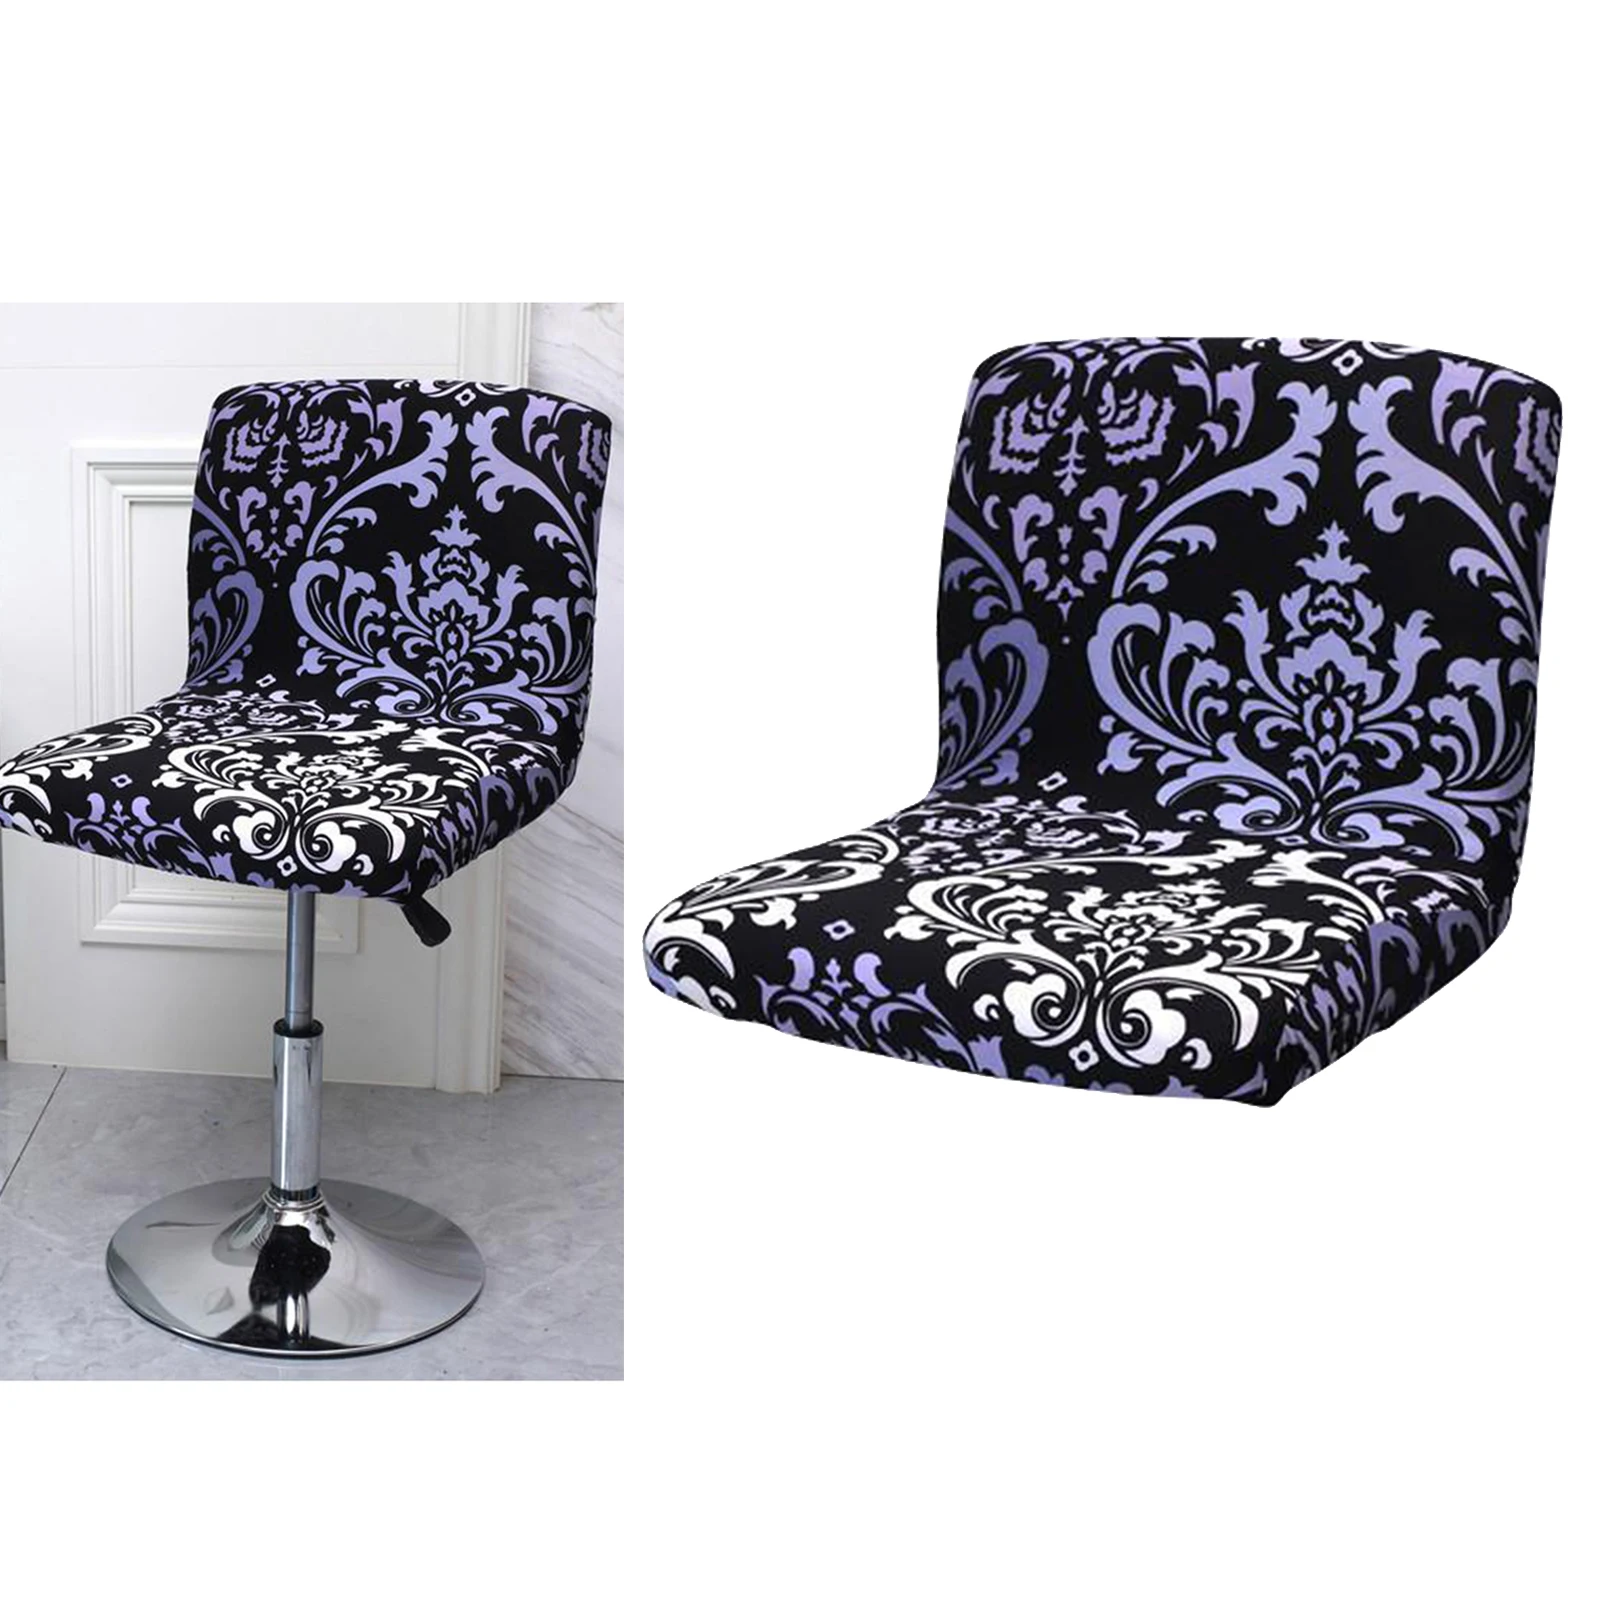 Bar Stool Chair Slipcover 16 Chair And Sofa Covers